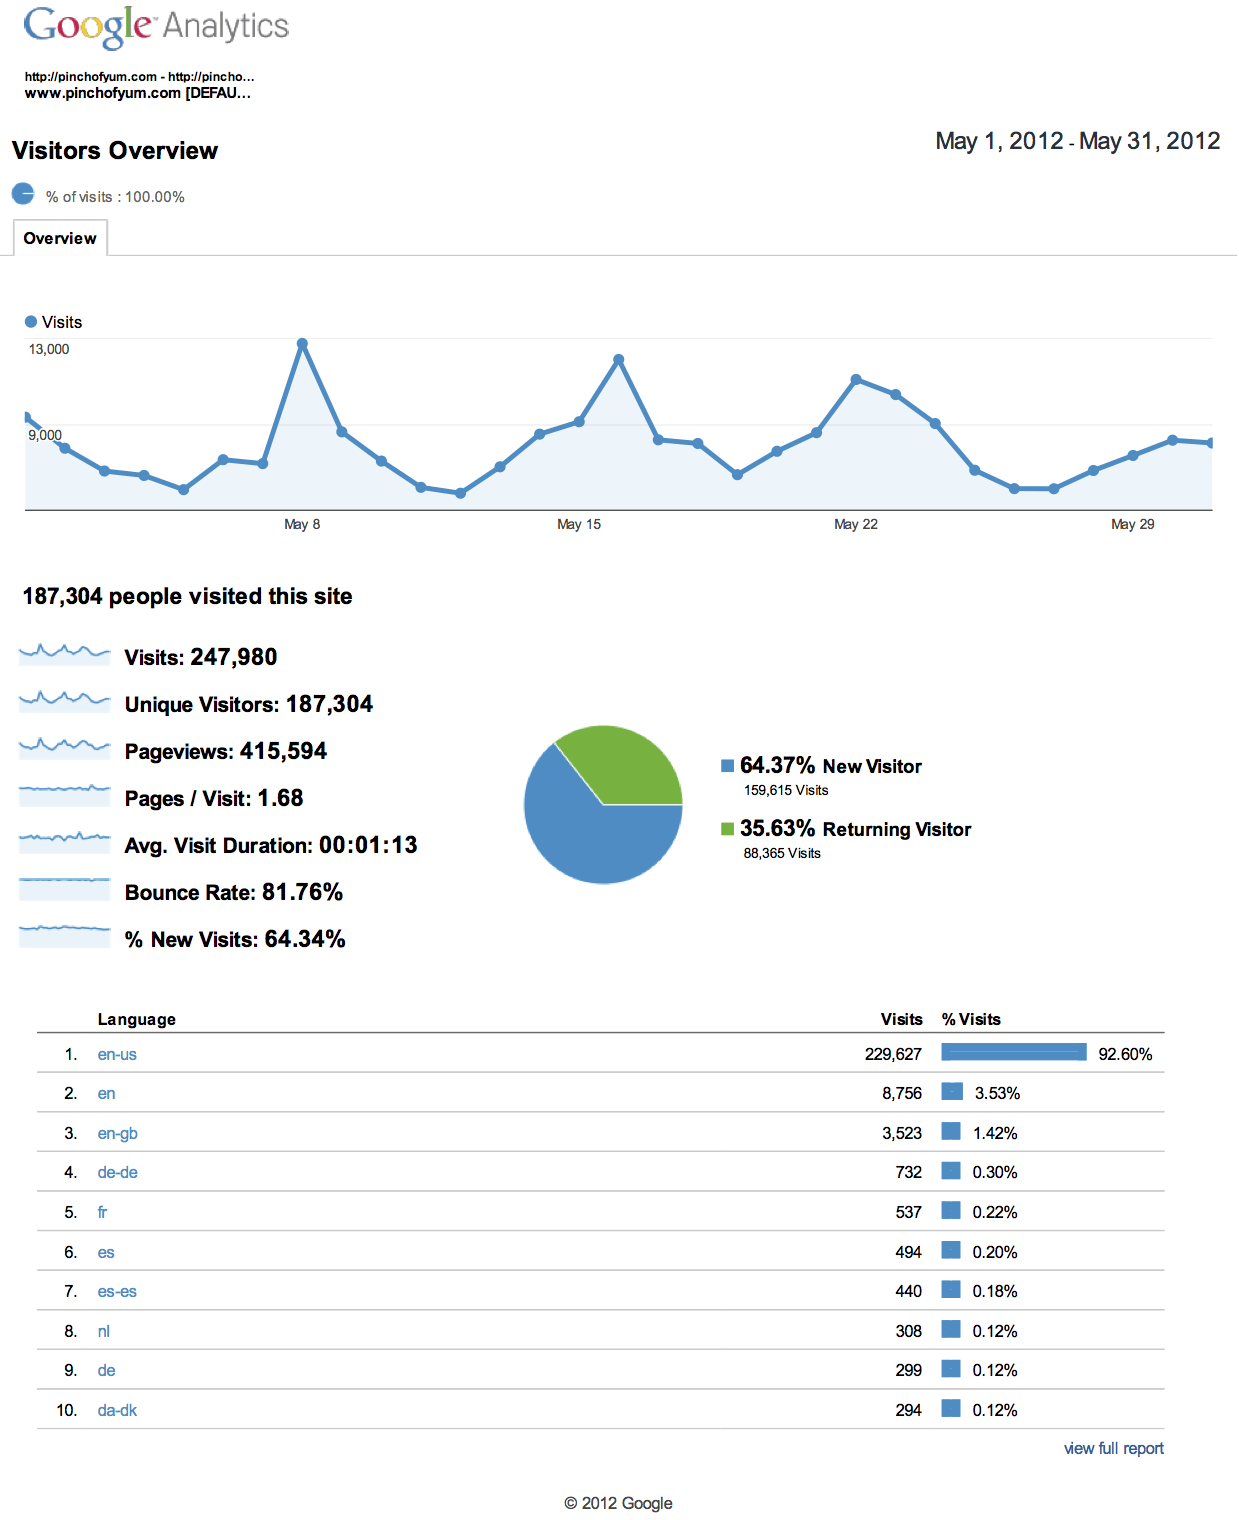 Visitor Overview - May Graphs.